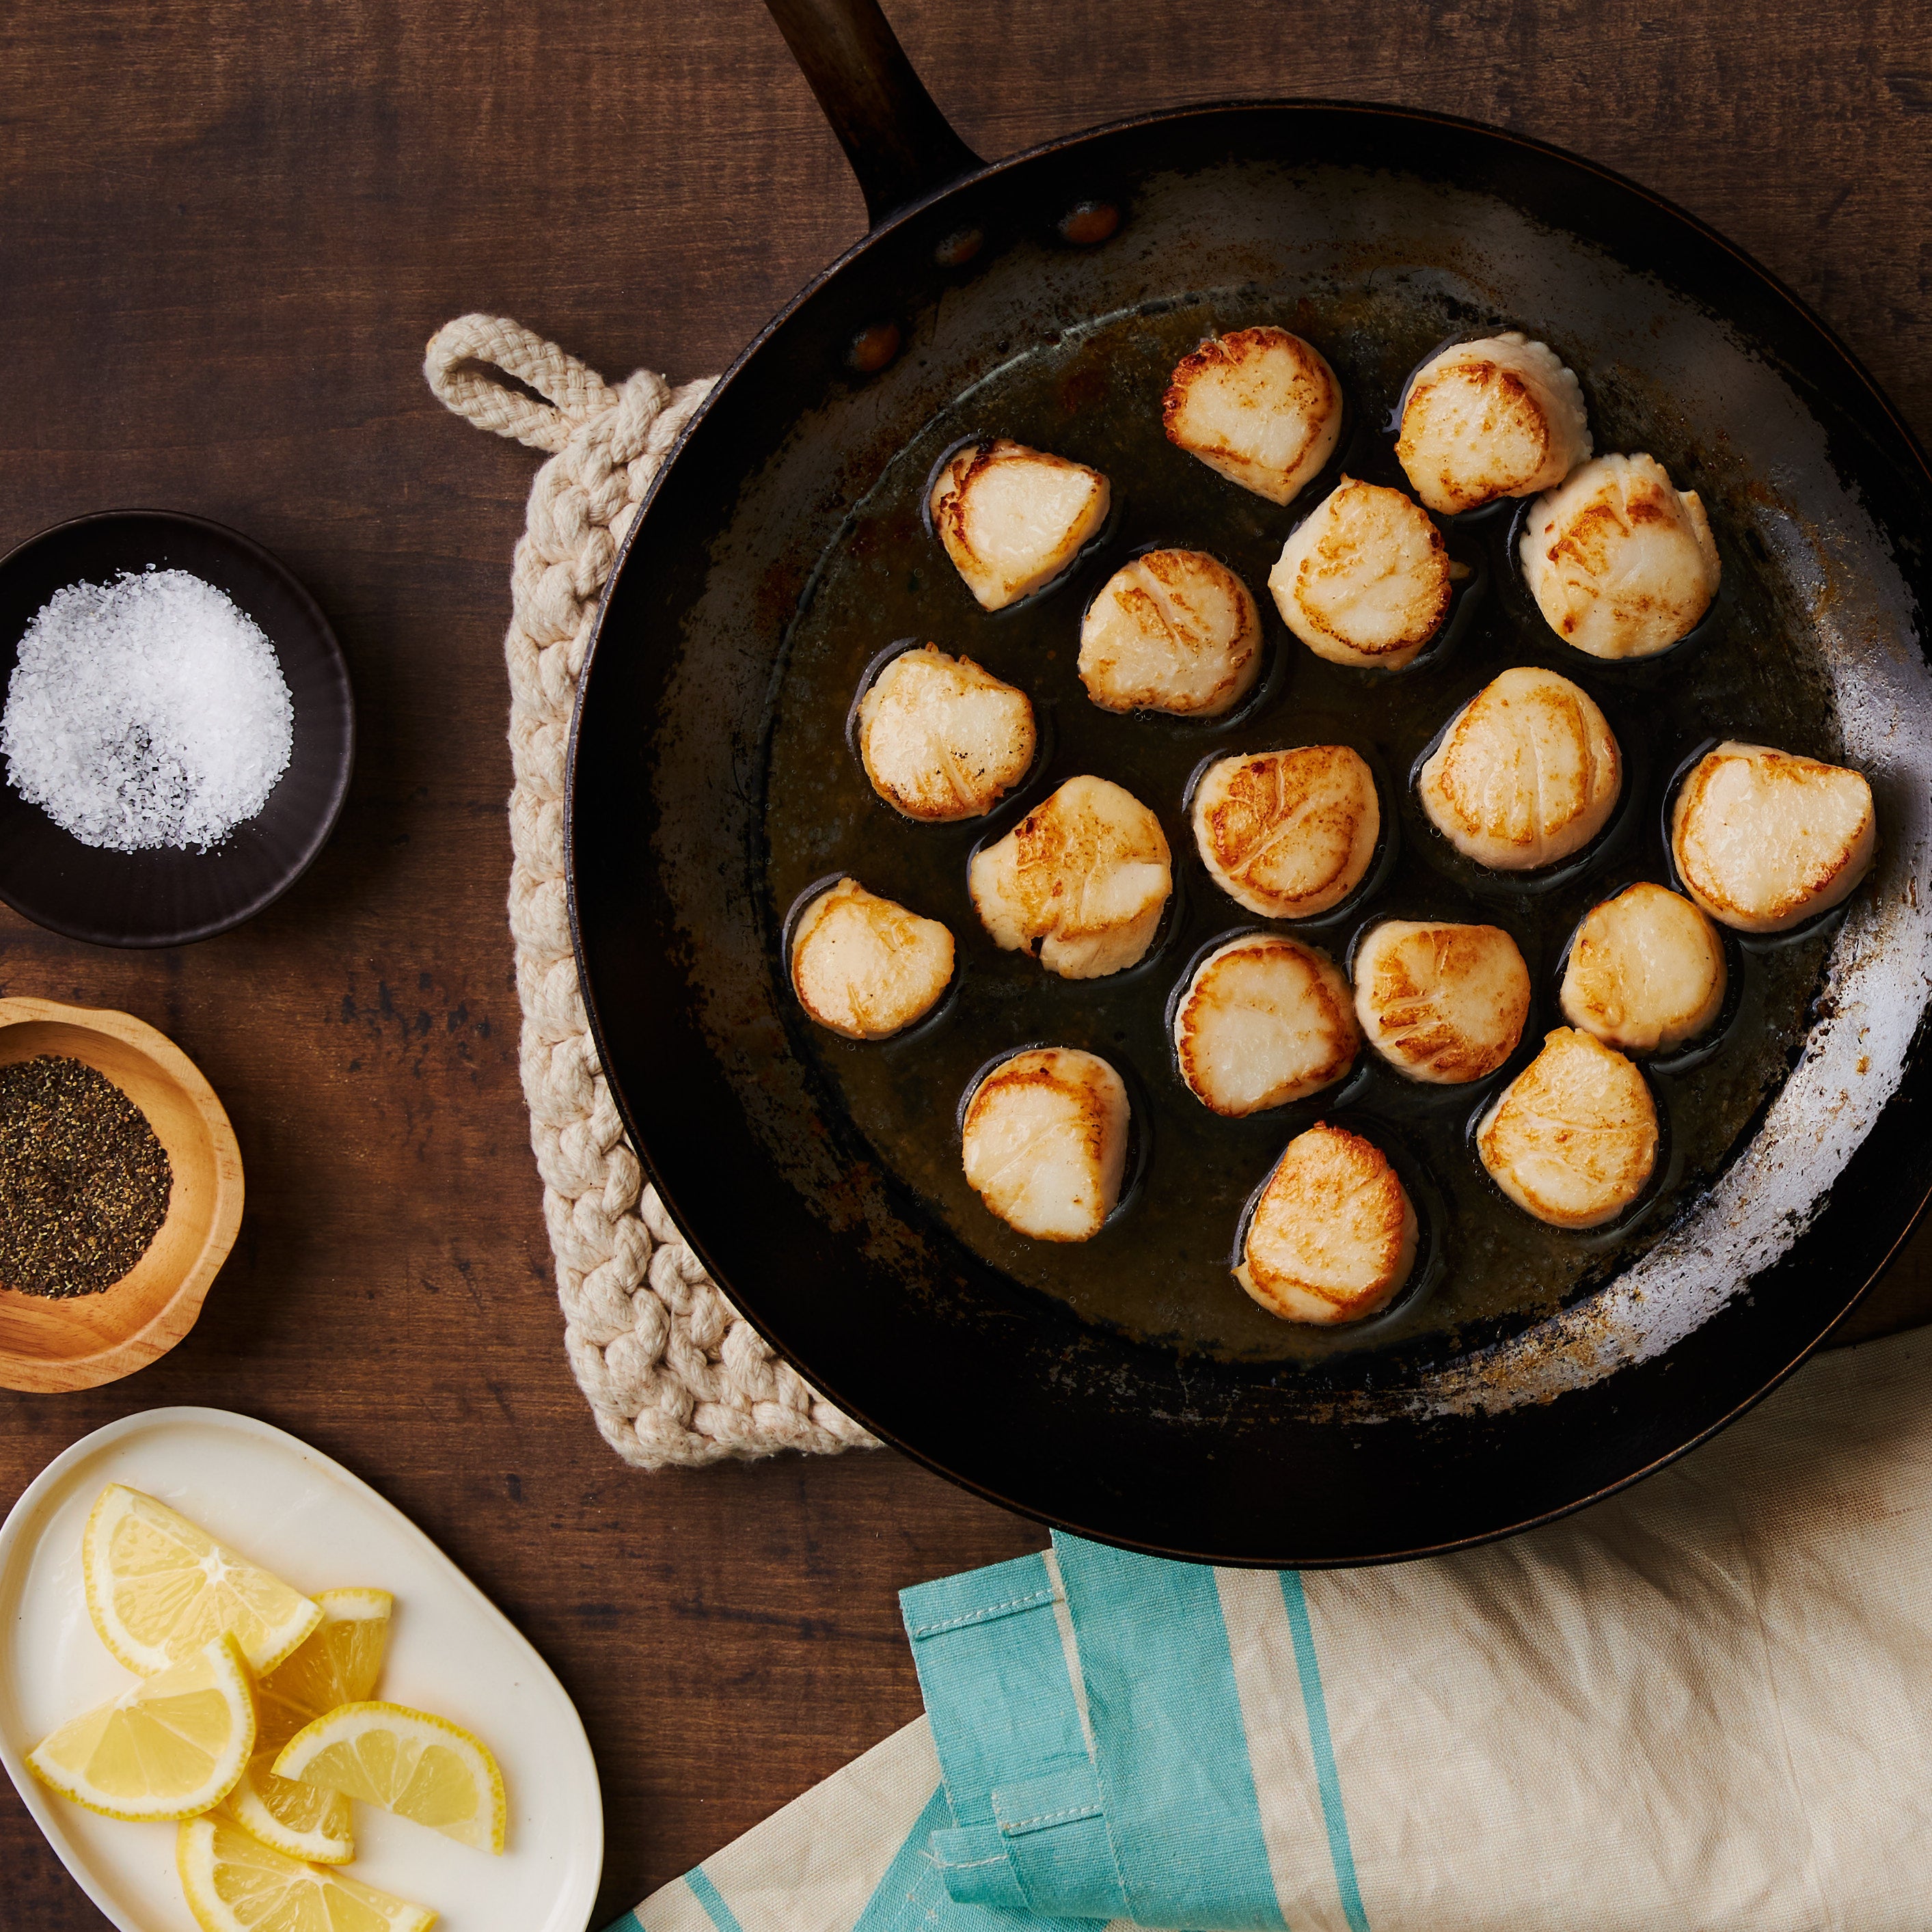 An image of our Maine Dayboat Scallops seared in a cast iron pan, surrounded by salt, pepper and lemon wedges